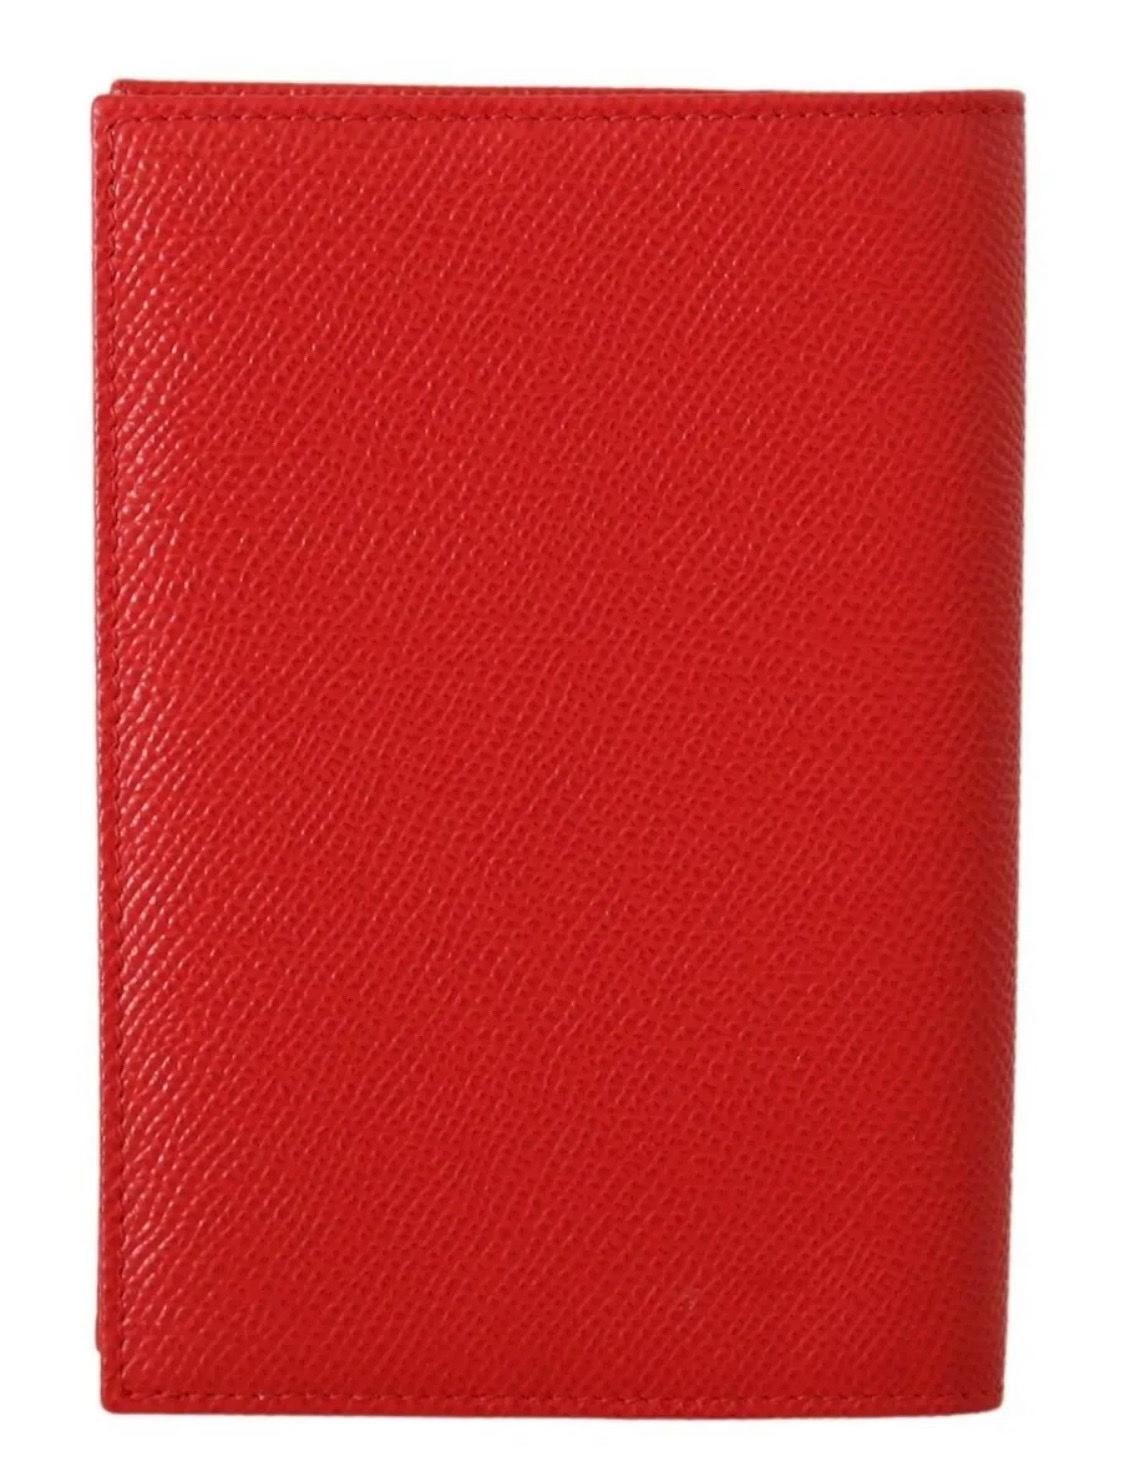 Red Dolce & Gabbana leather bifold wallet with DG crystals features